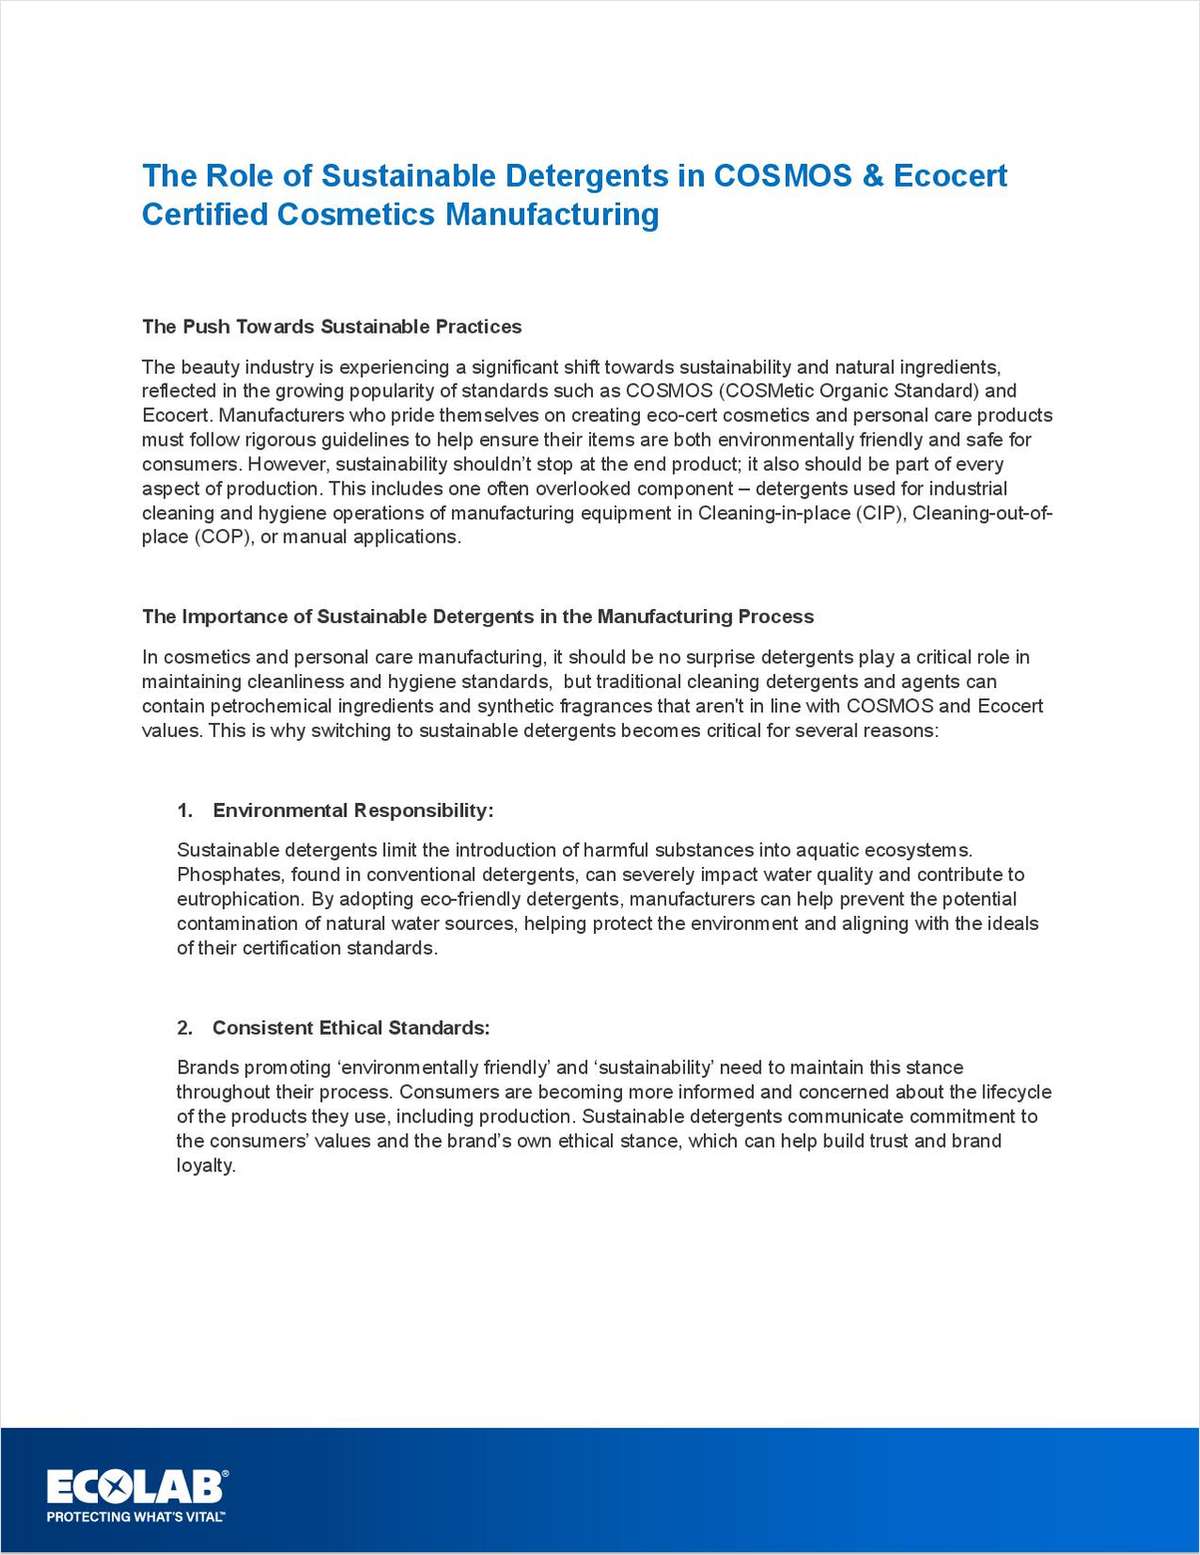 The Role of Sustainable Detergents in COSMOS & Ecocert Certified Cosmetics Manufacturing